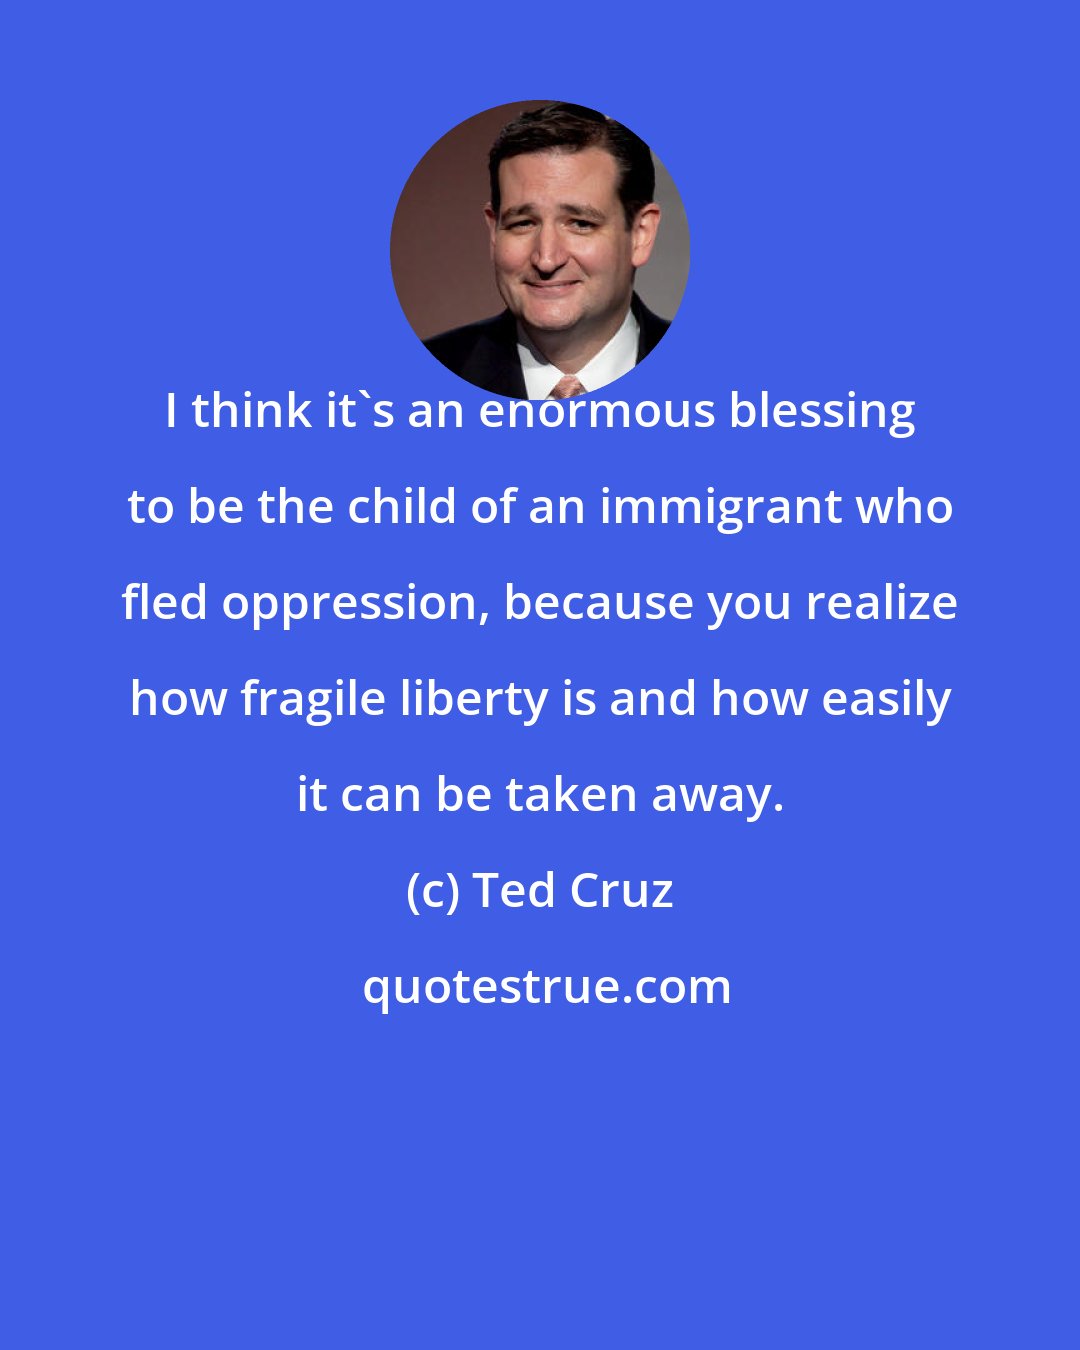 Ted Cruz: I think it's an enormous blessing to be the child of an immigrant who fled oppression, because you realize how fragile liberty is and how easily it can be taken away.